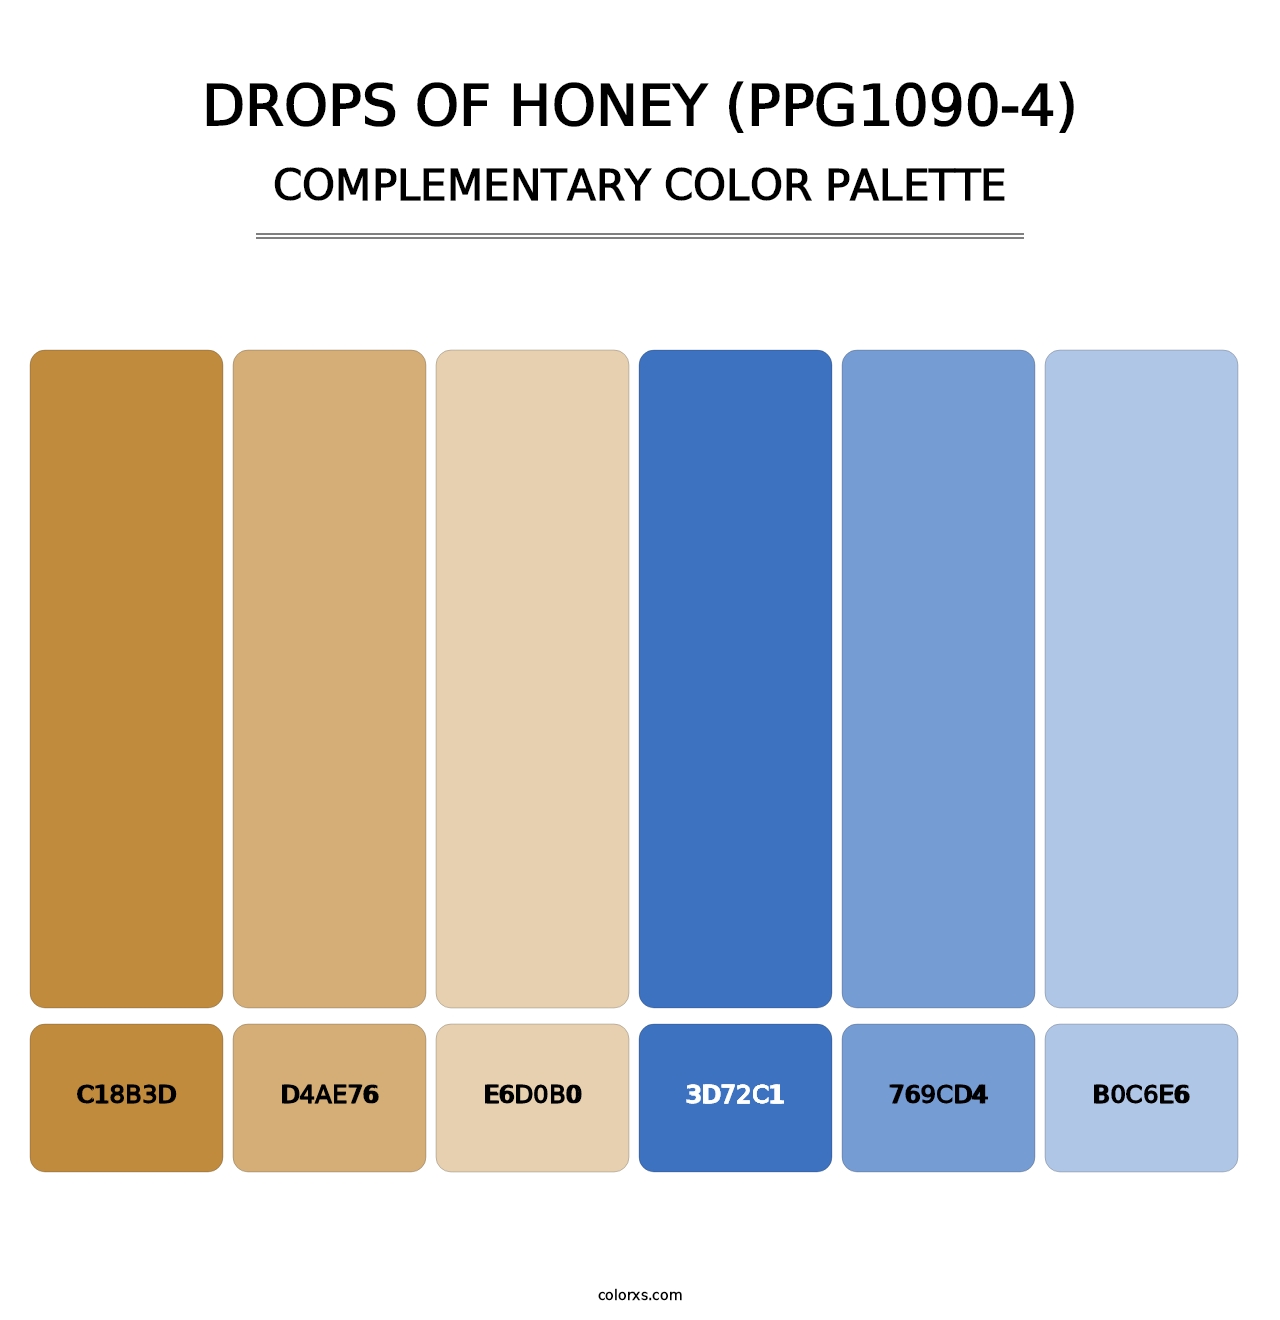 Drops Of Honey (PPG1090-4) - Complementary Color Palette